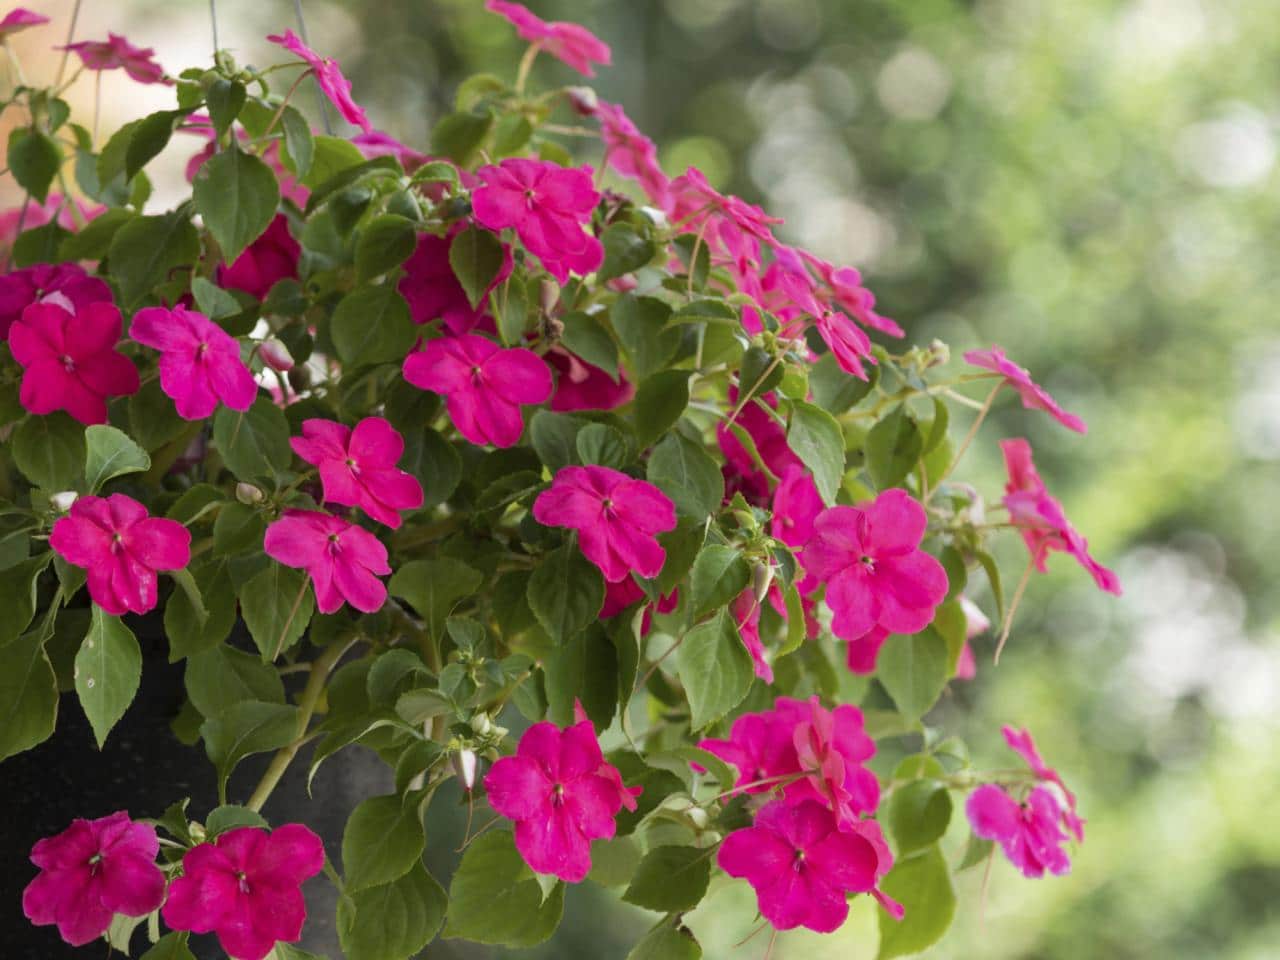 Are Impatiens Poisonous to Dogs?